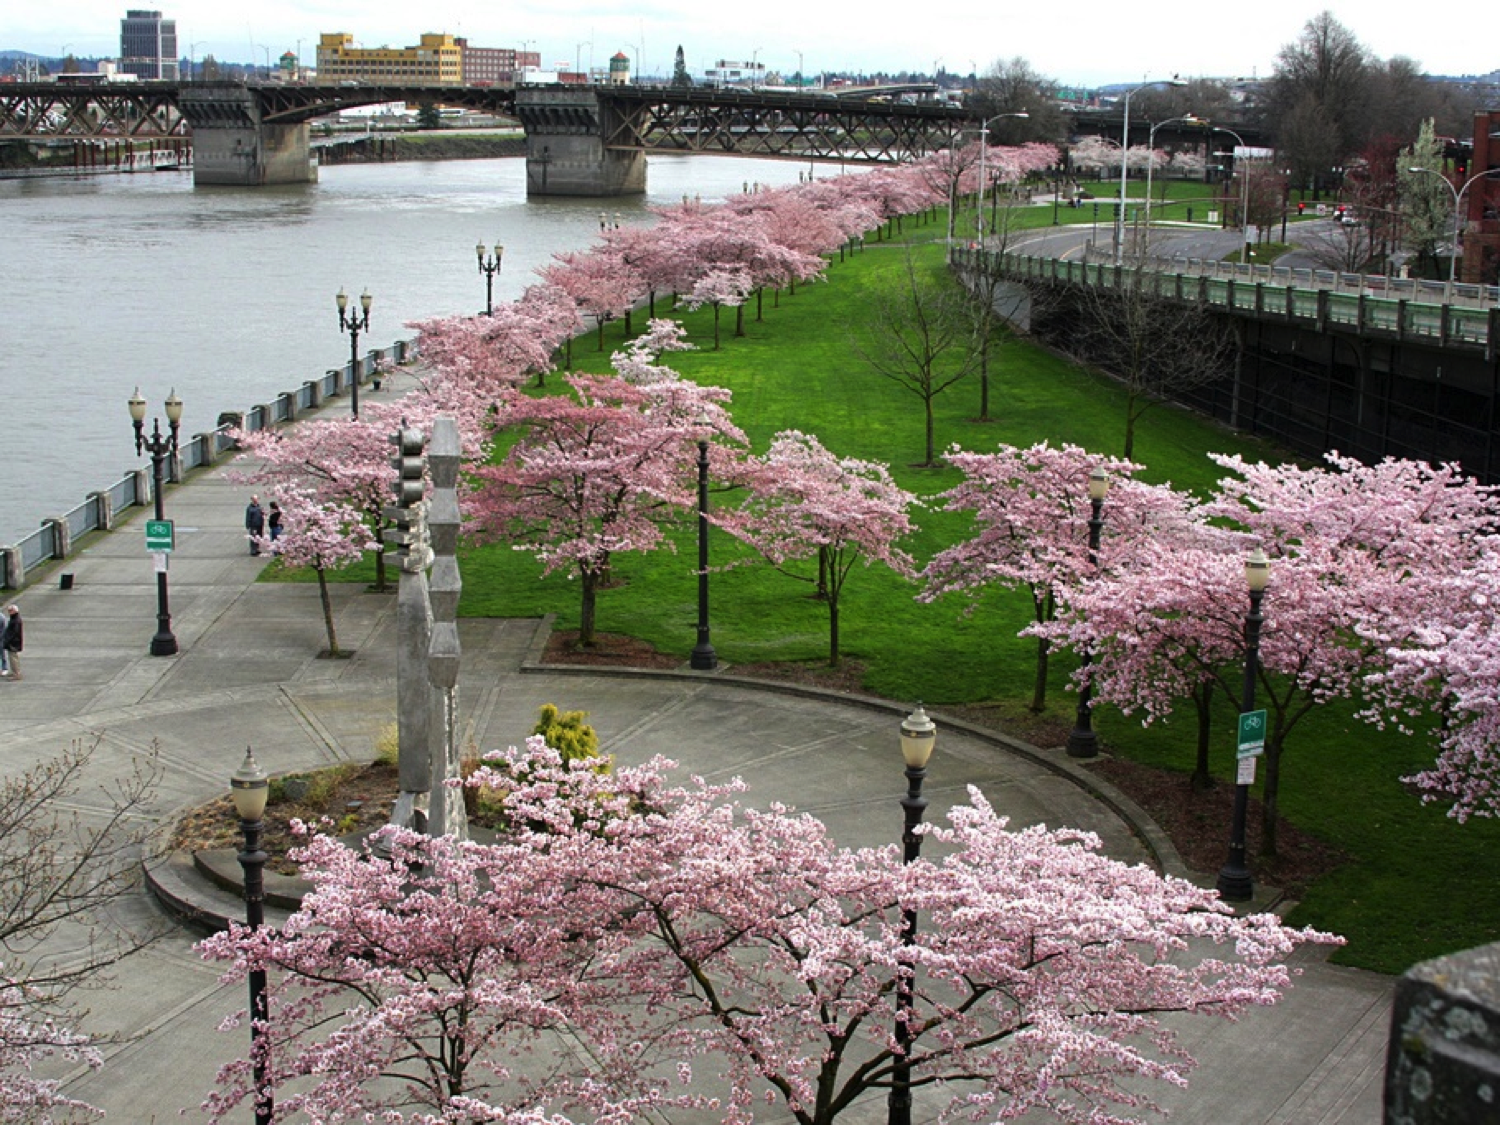 Waterfront Park, Portland by Northwes-Historian via Wikimedia Commons (CC BY-SA 2.0)